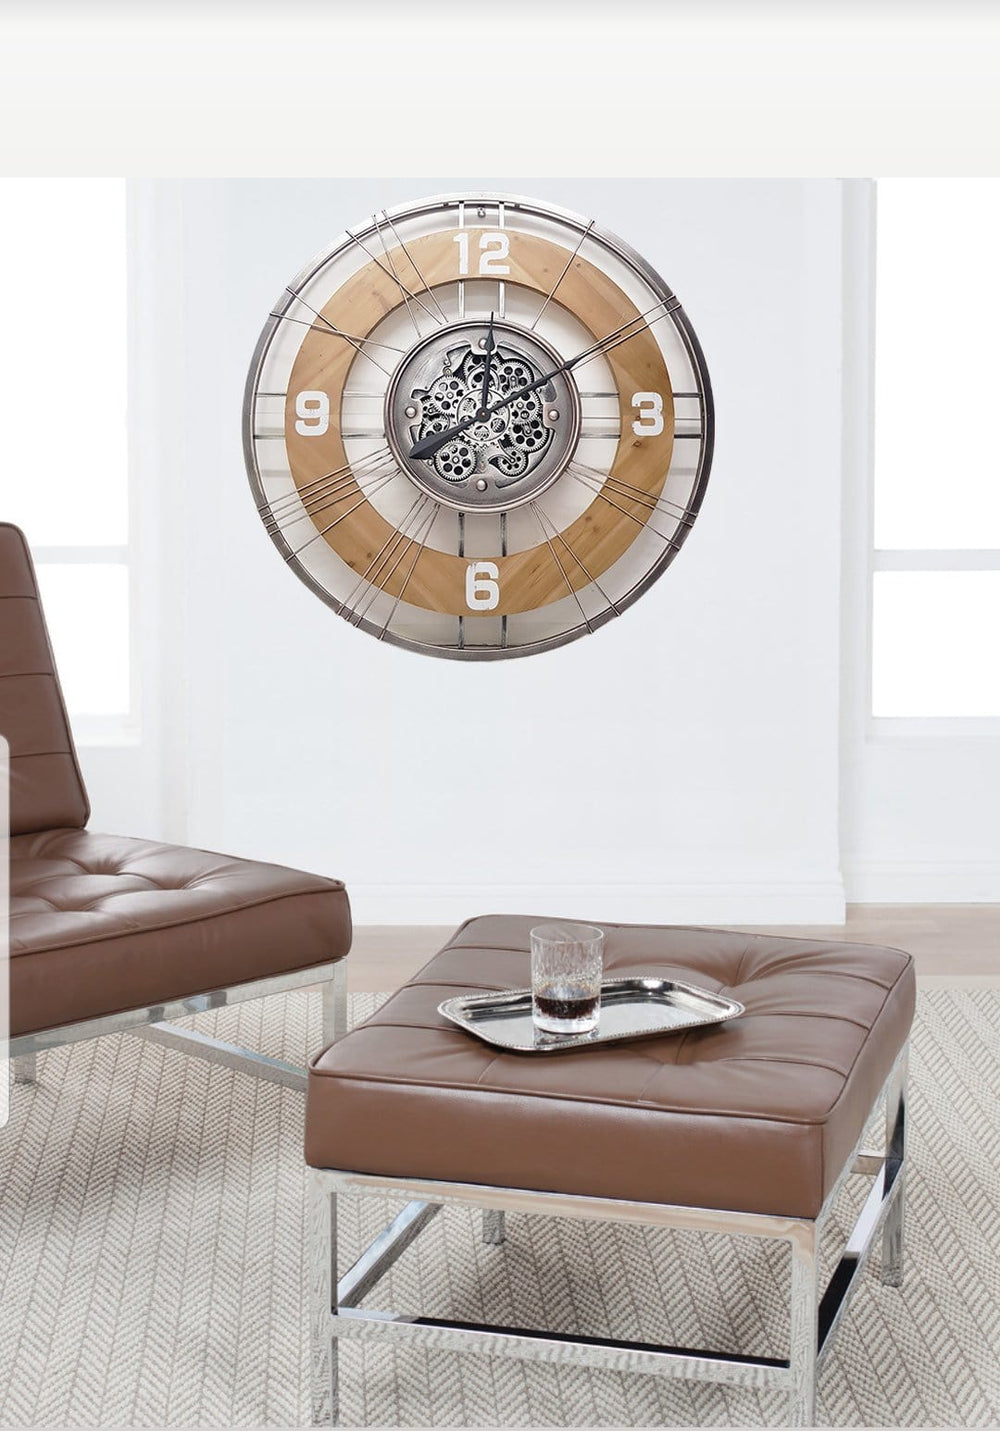 Chilli Wall Clock Geo Roman Round Country Moving Cogs Wall Clock Brand